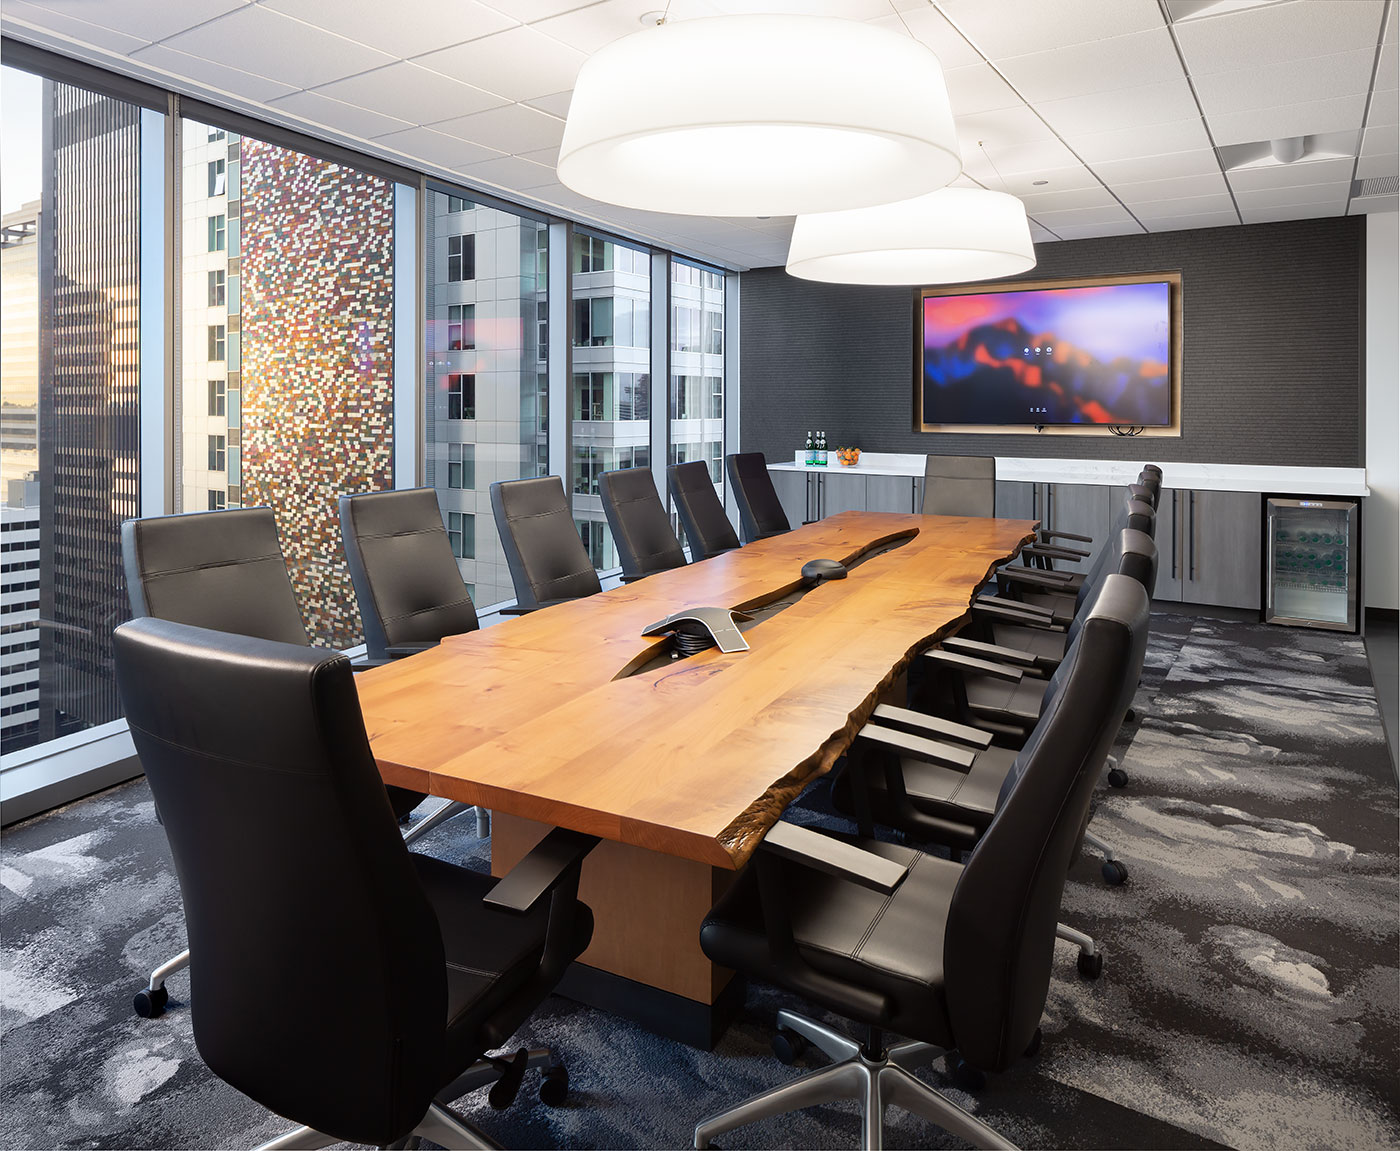 Conference room with large wooden table